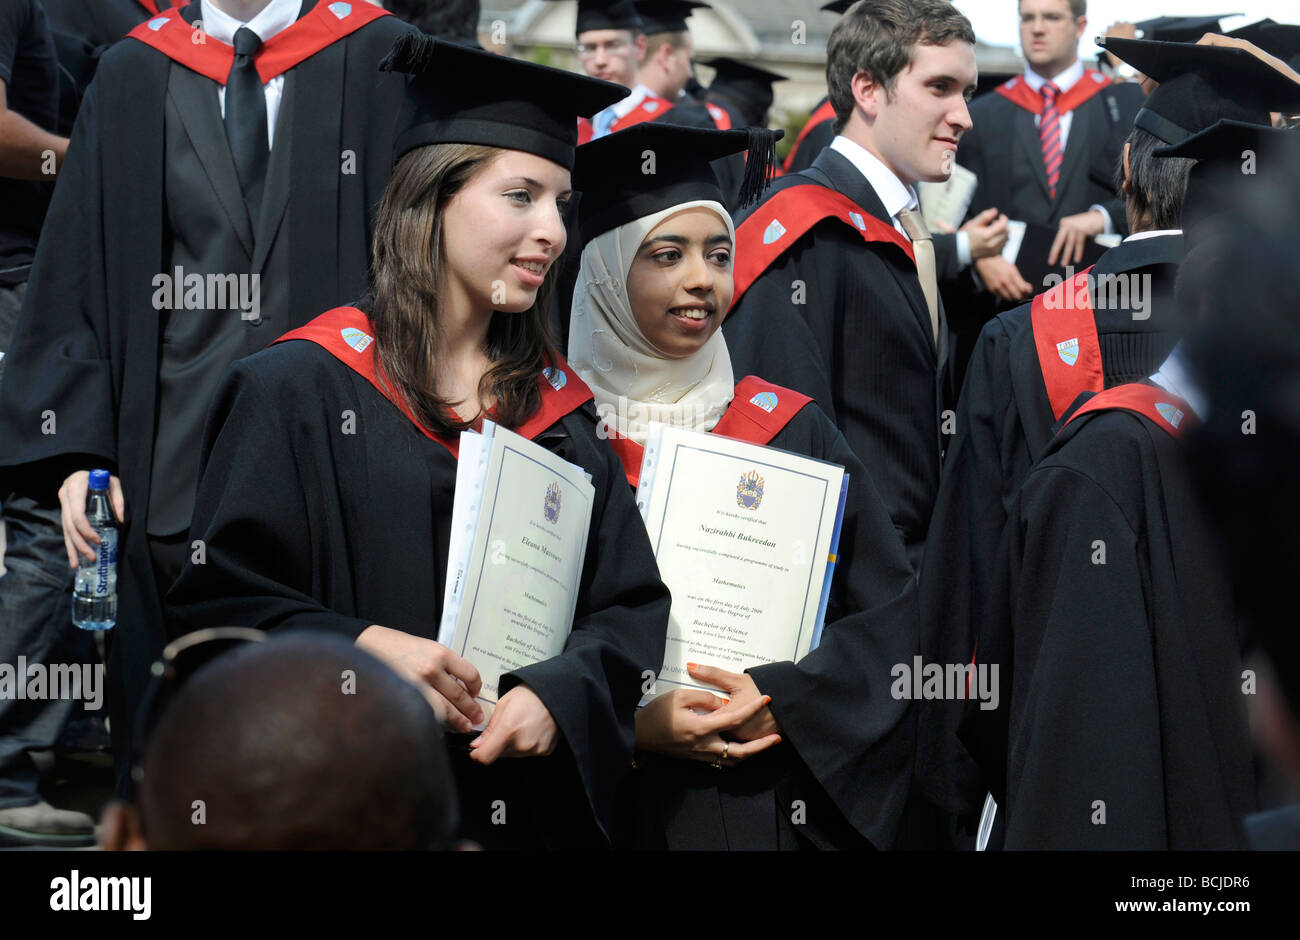 GRADUATES PROUDLY POSE WITH THEIR DEGREES AS THEY  CELEBRATE THEIR GRADUATION DAY AT A BRITISH UNIVERSITY Stock Photo